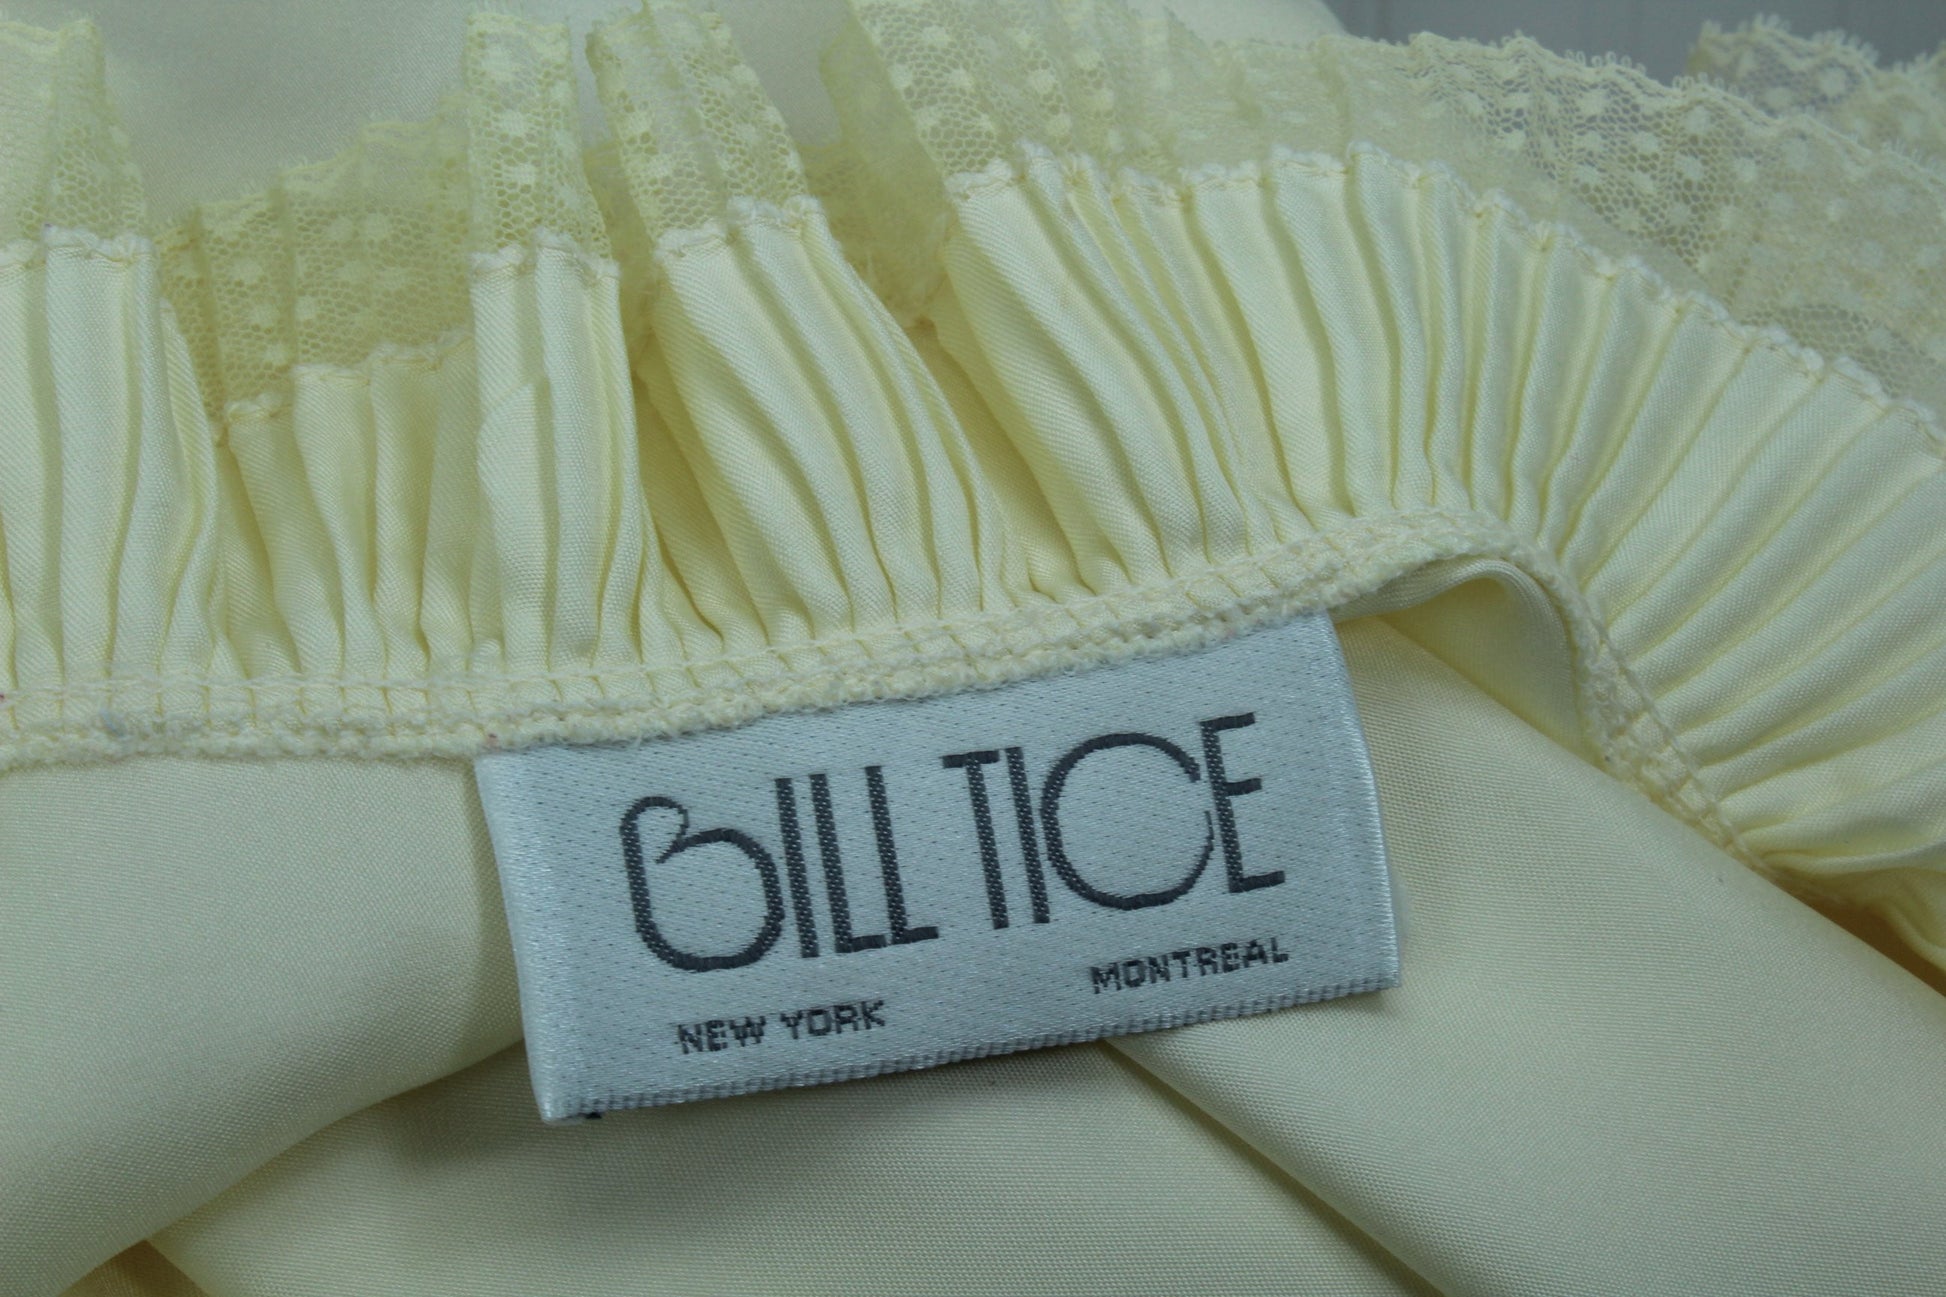 Bill Tice Nightgown Peignoir Set Ivory Pleated Polyester Lace Full Length Size Medium 1970s